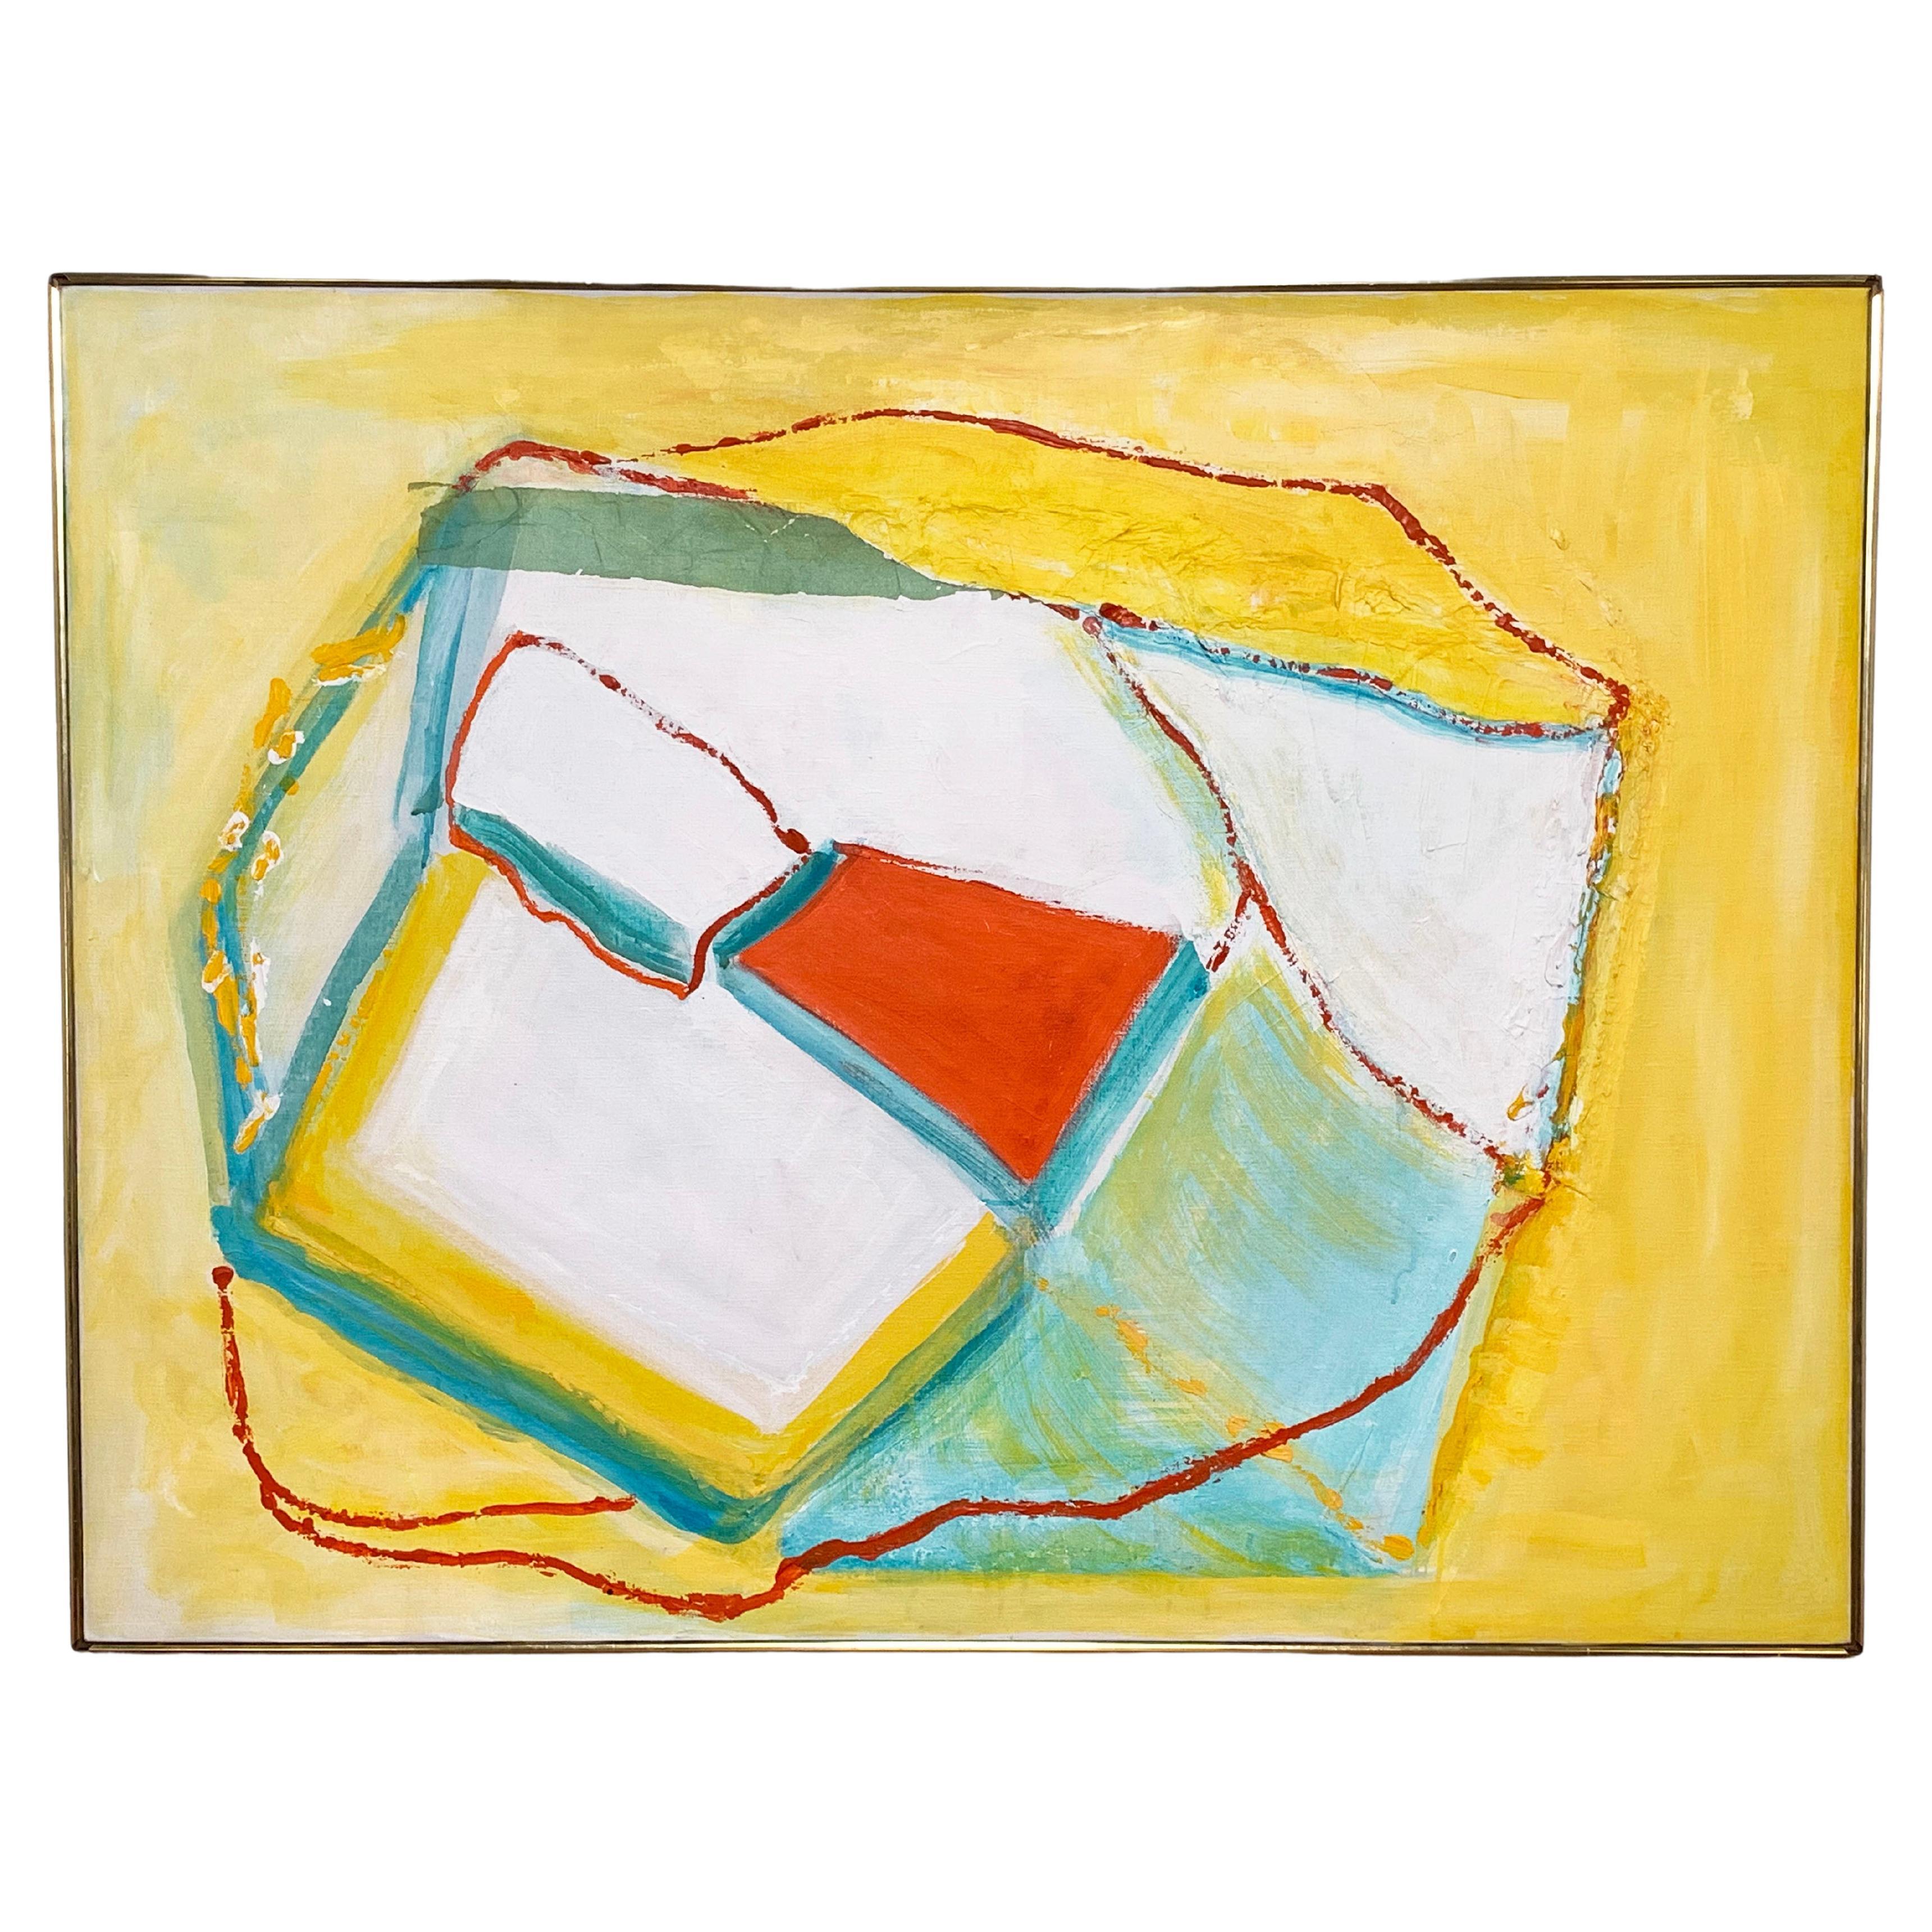 Abstract Modernist Painting Marked "Shozo No. 2" Circa 1960s